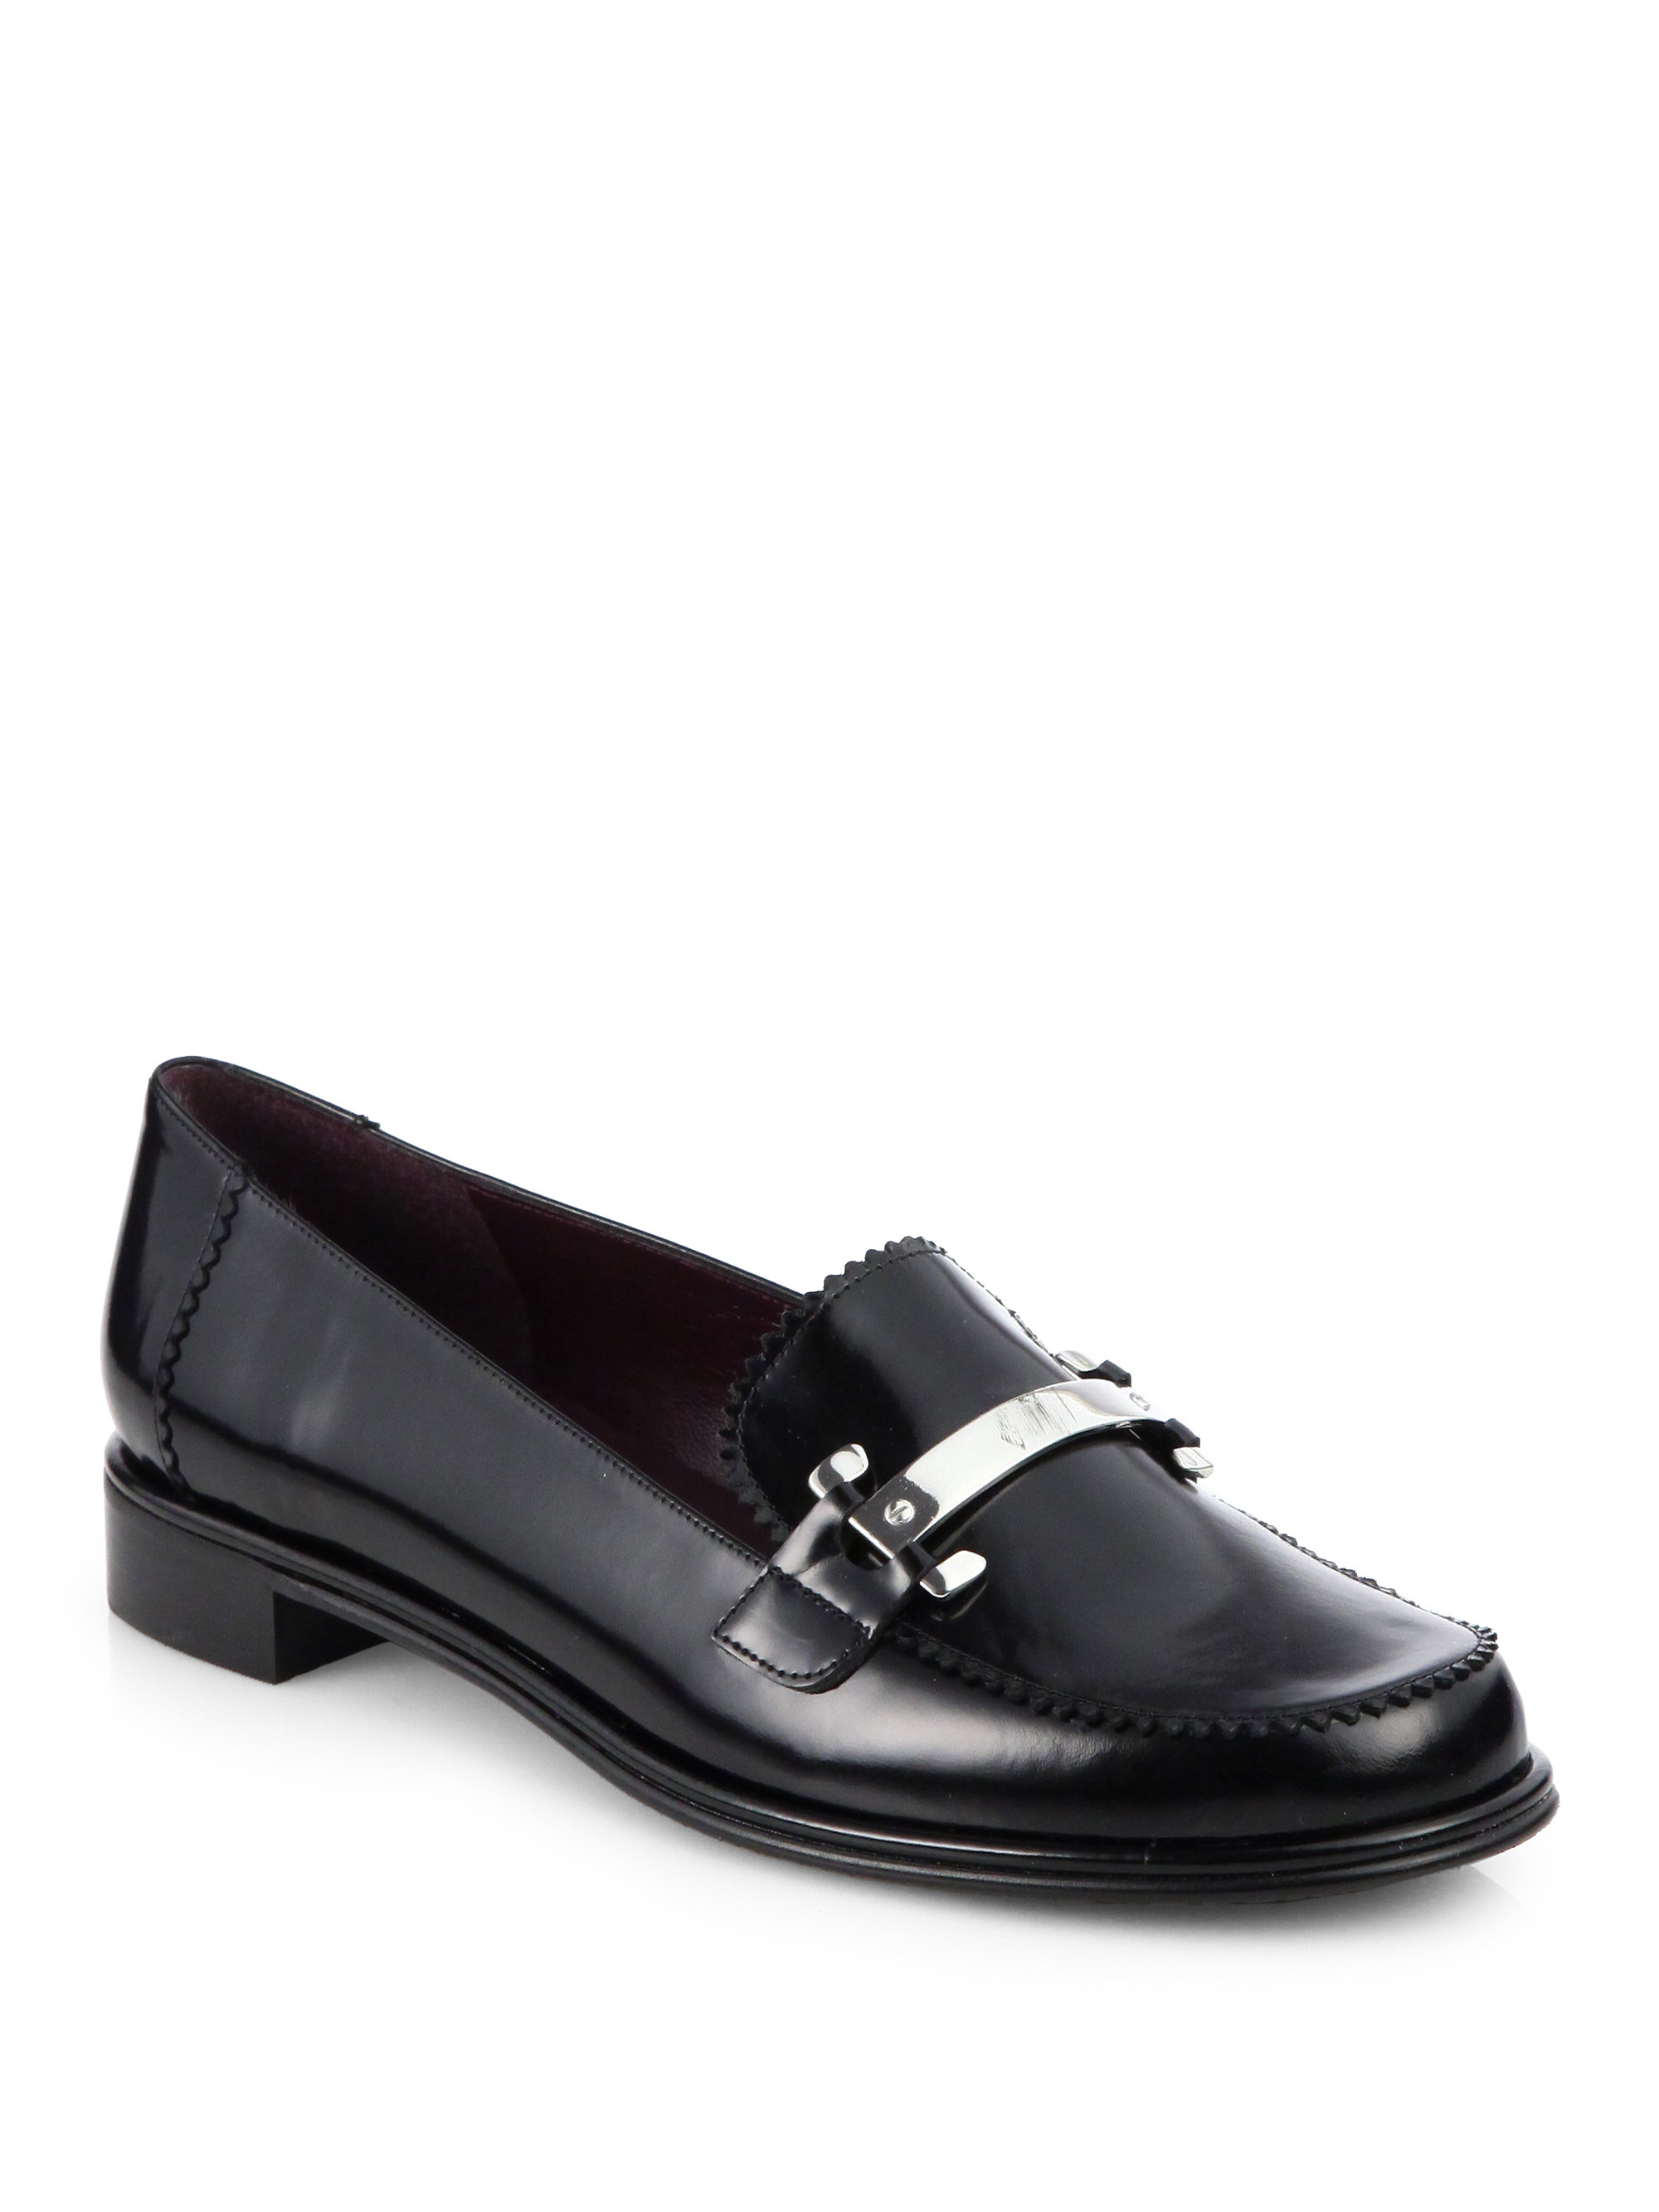 Lyst - Stuart Weitzman Piracy Polished Leather Loafers in Black